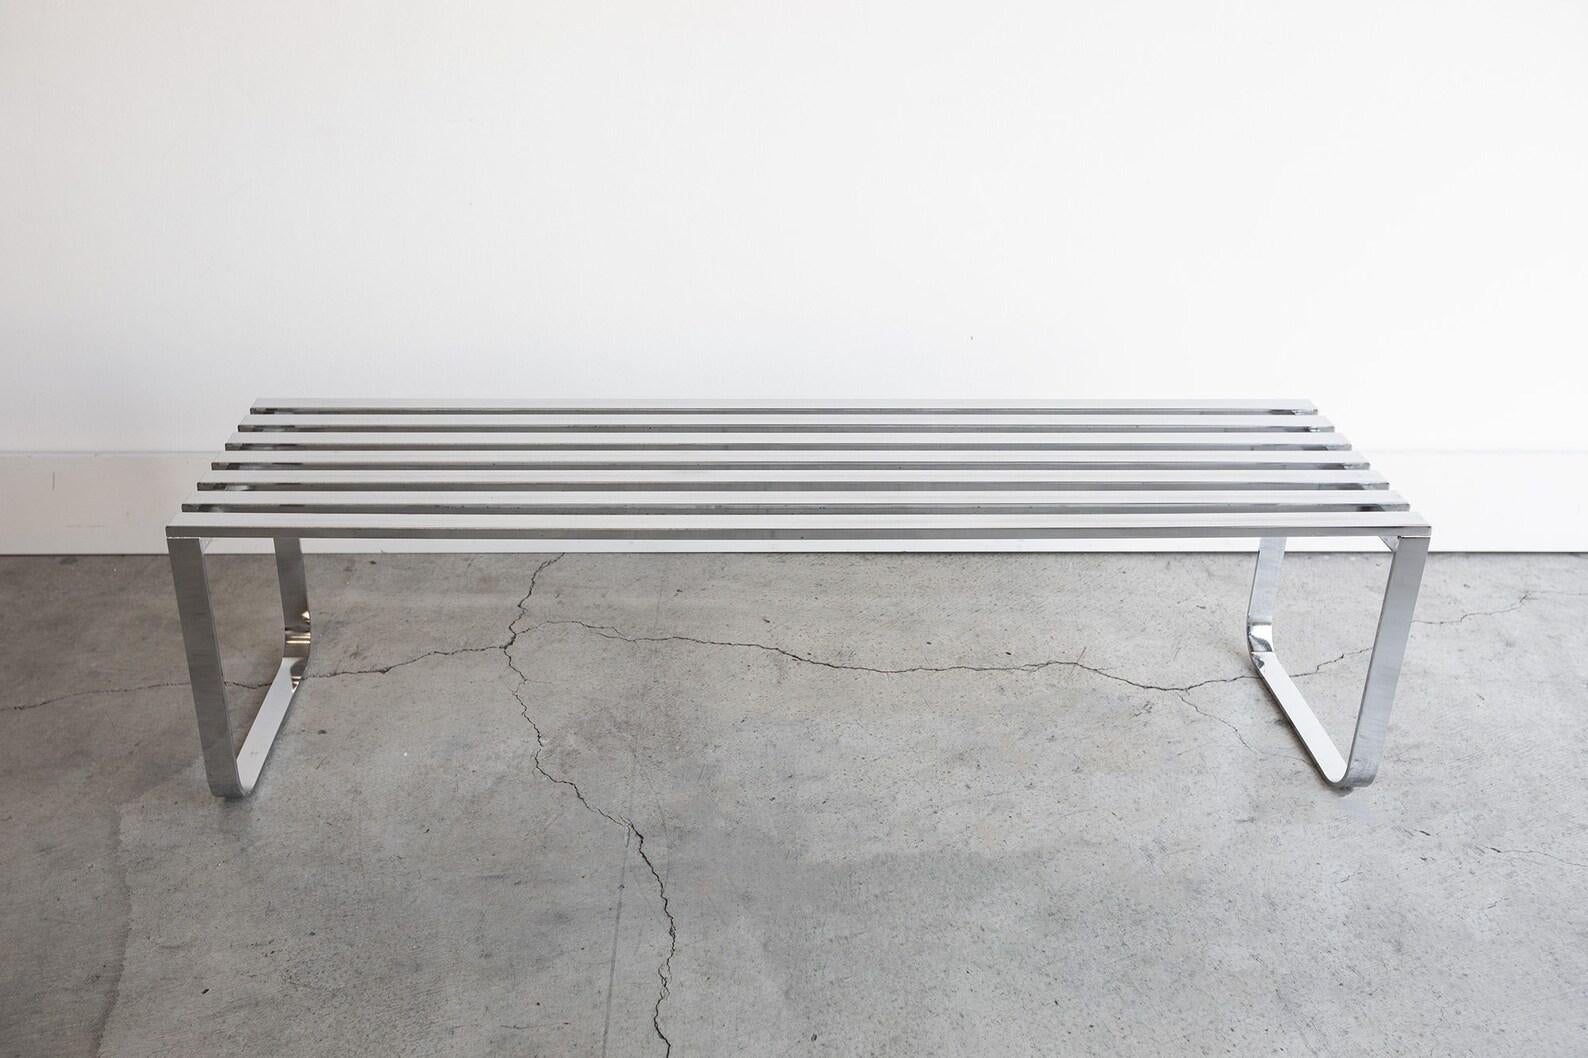 Gorgeous and very rare Milo Baughman chrome slatted bench from the 1970s for DIA (Design Institute of America). Can be used as a coffee table, bench in an entry way, or would sit beautifully at the foot of your bed. Perfect fit for any mid century